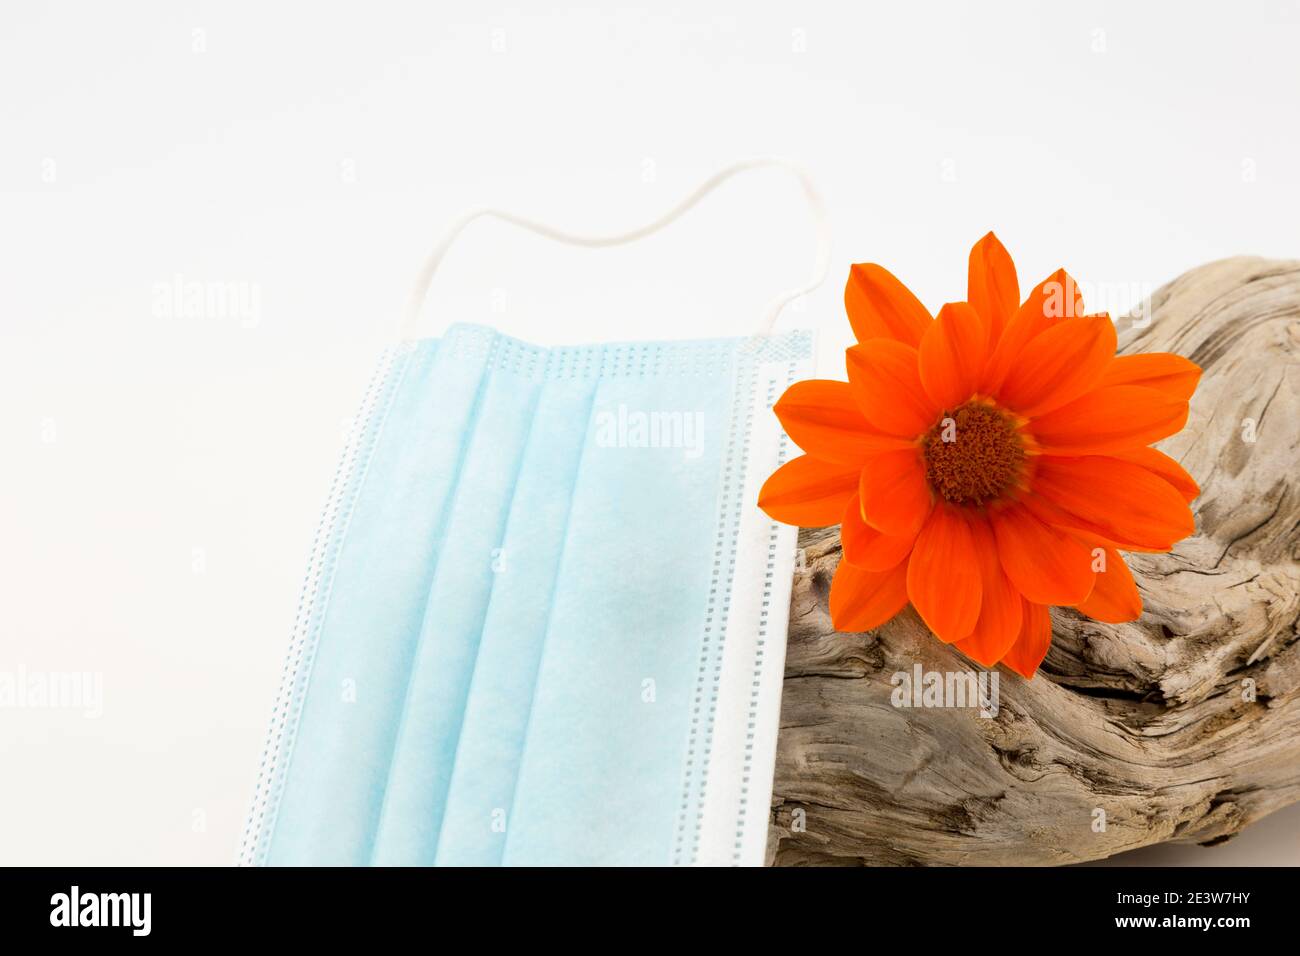 Face mask placed with orange daisy on gnarled driftwood with copy space on white background reflects concept of pandemic responsibility and protection Stock Photo